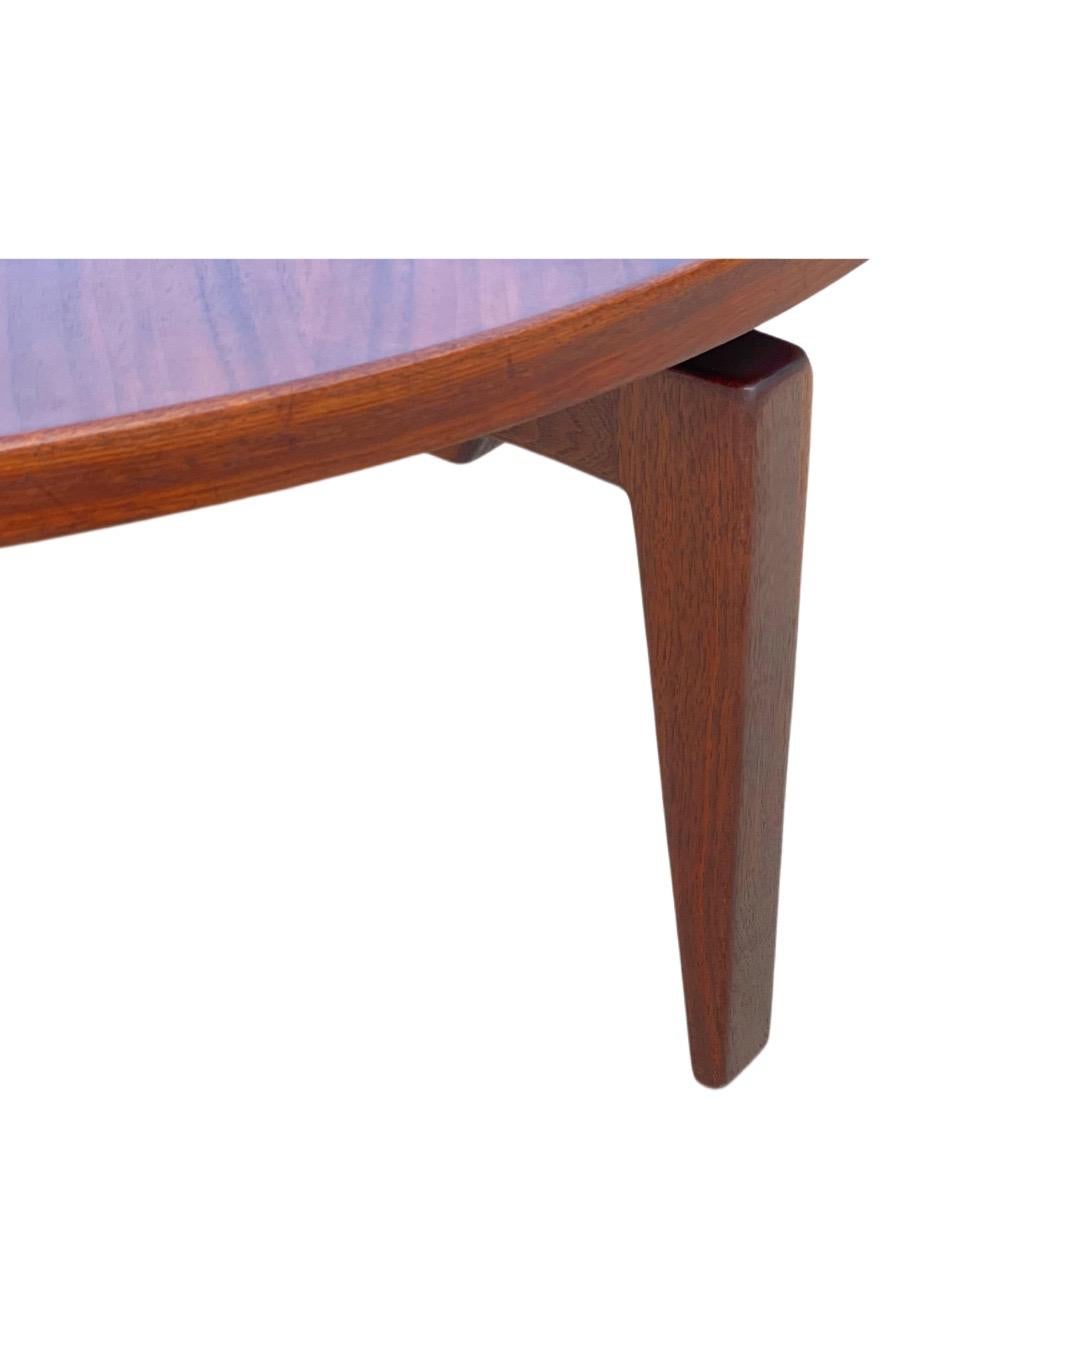 Mid-20th Century Midcentury Round Coffee Table by Jens Risom in Walnut, Rotating Lazy Susan